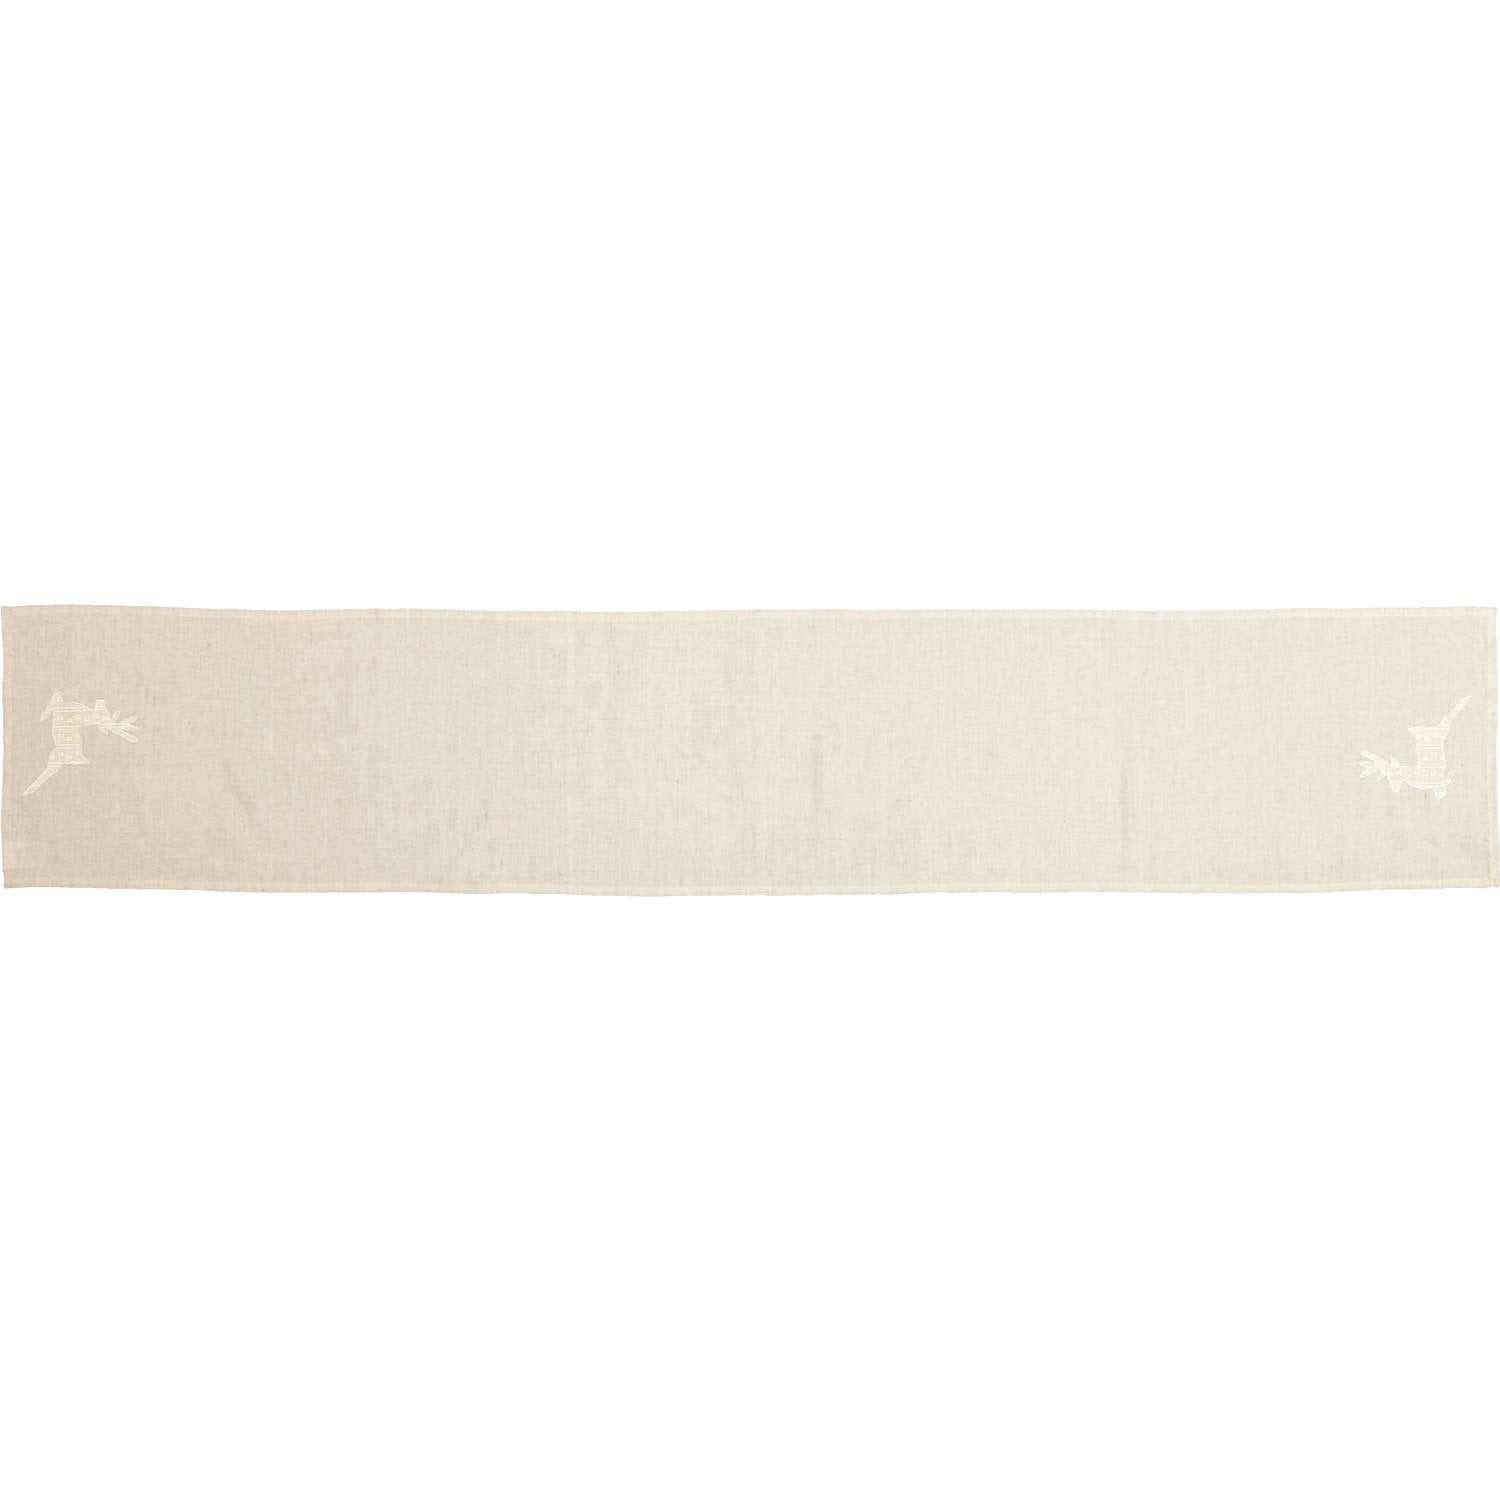 Creme Lace Deer Runner 13x72 VHC Brands - The Fox Decor